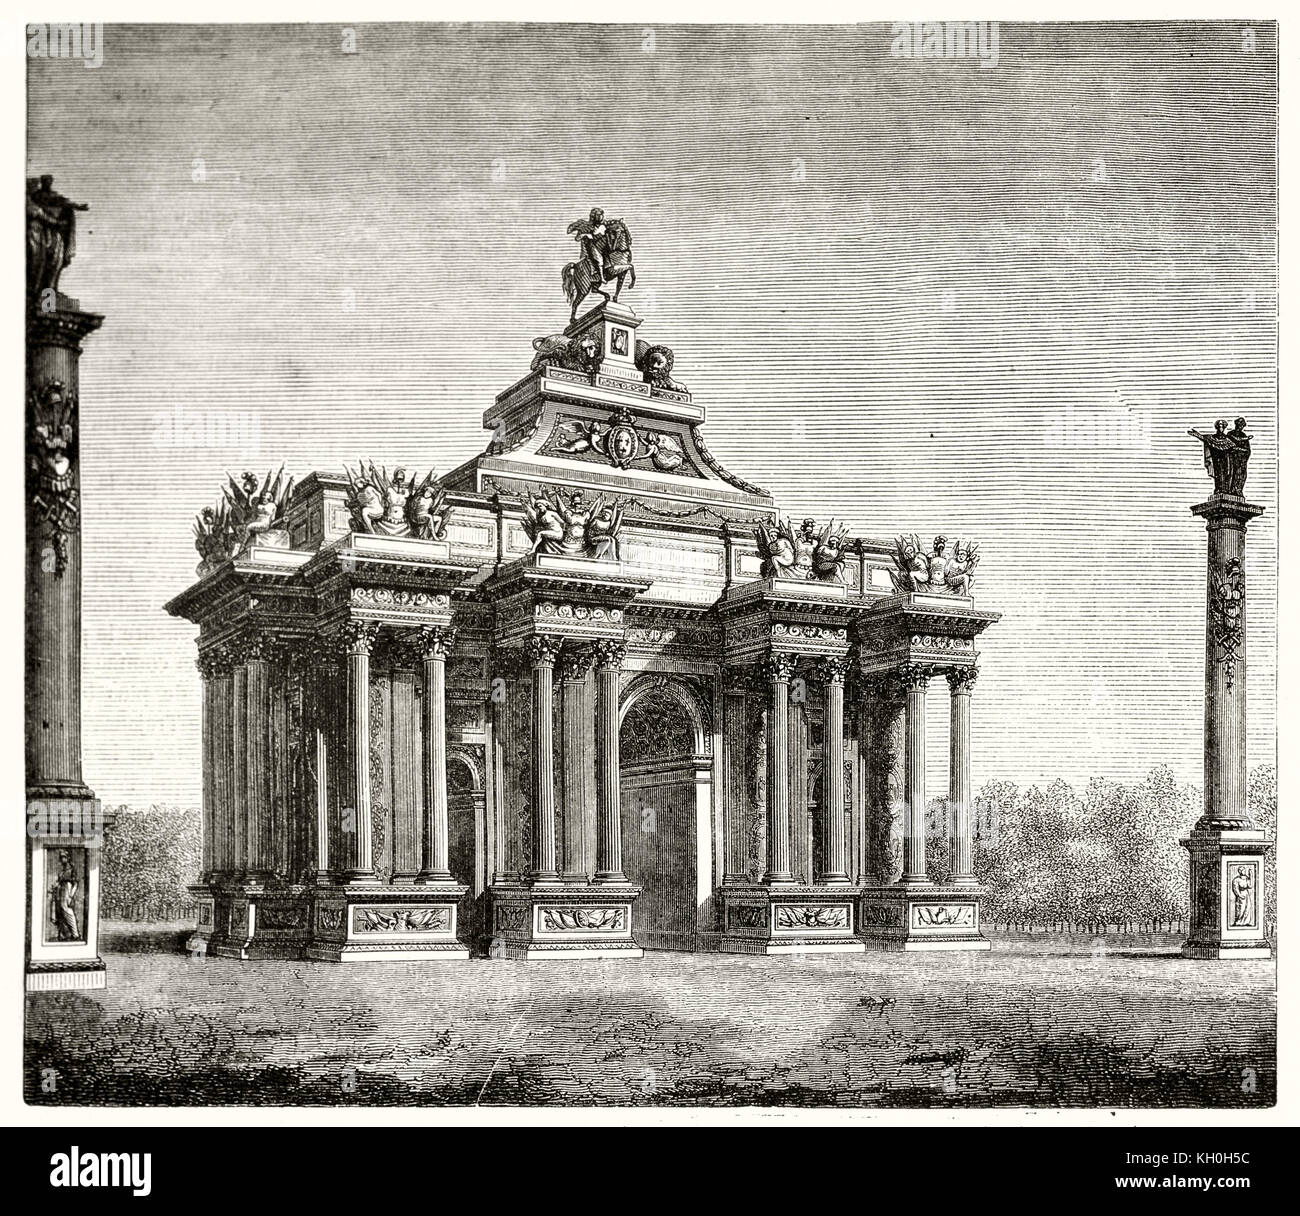 Triumphal arch designed by Charles Perrault during Louis XIV age and never done. Publ. on Magasin Pittoresque, Paris, 1847 Stock Photo